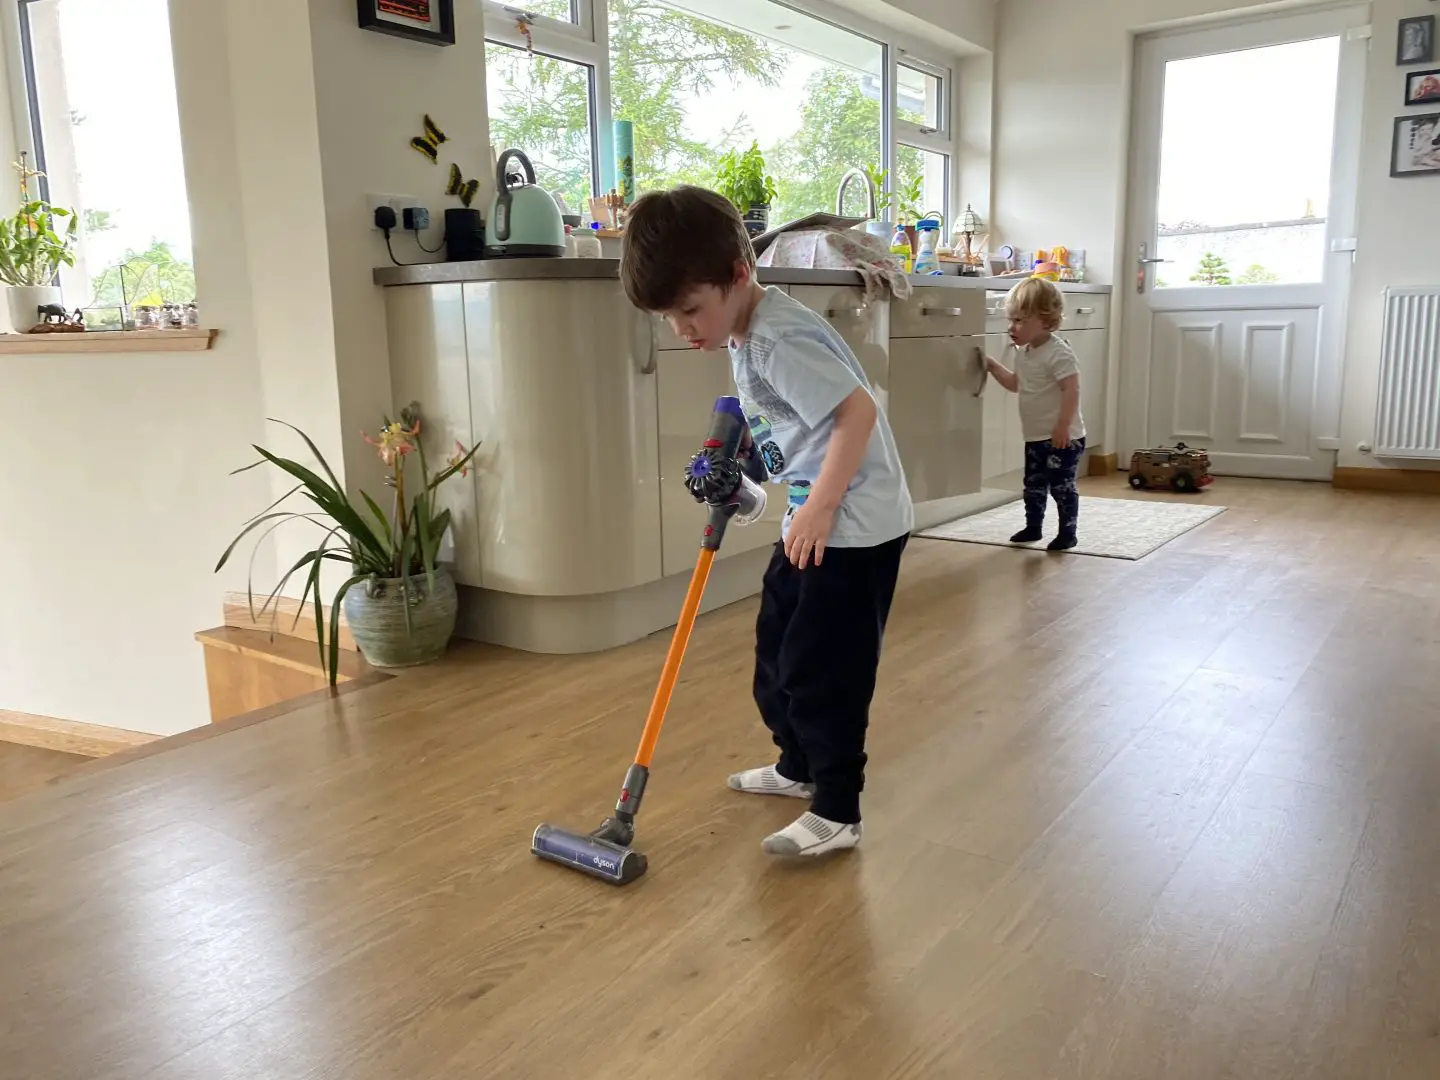 A boy in a kitchen using a toy Dyson cord-free vacuum cleaner